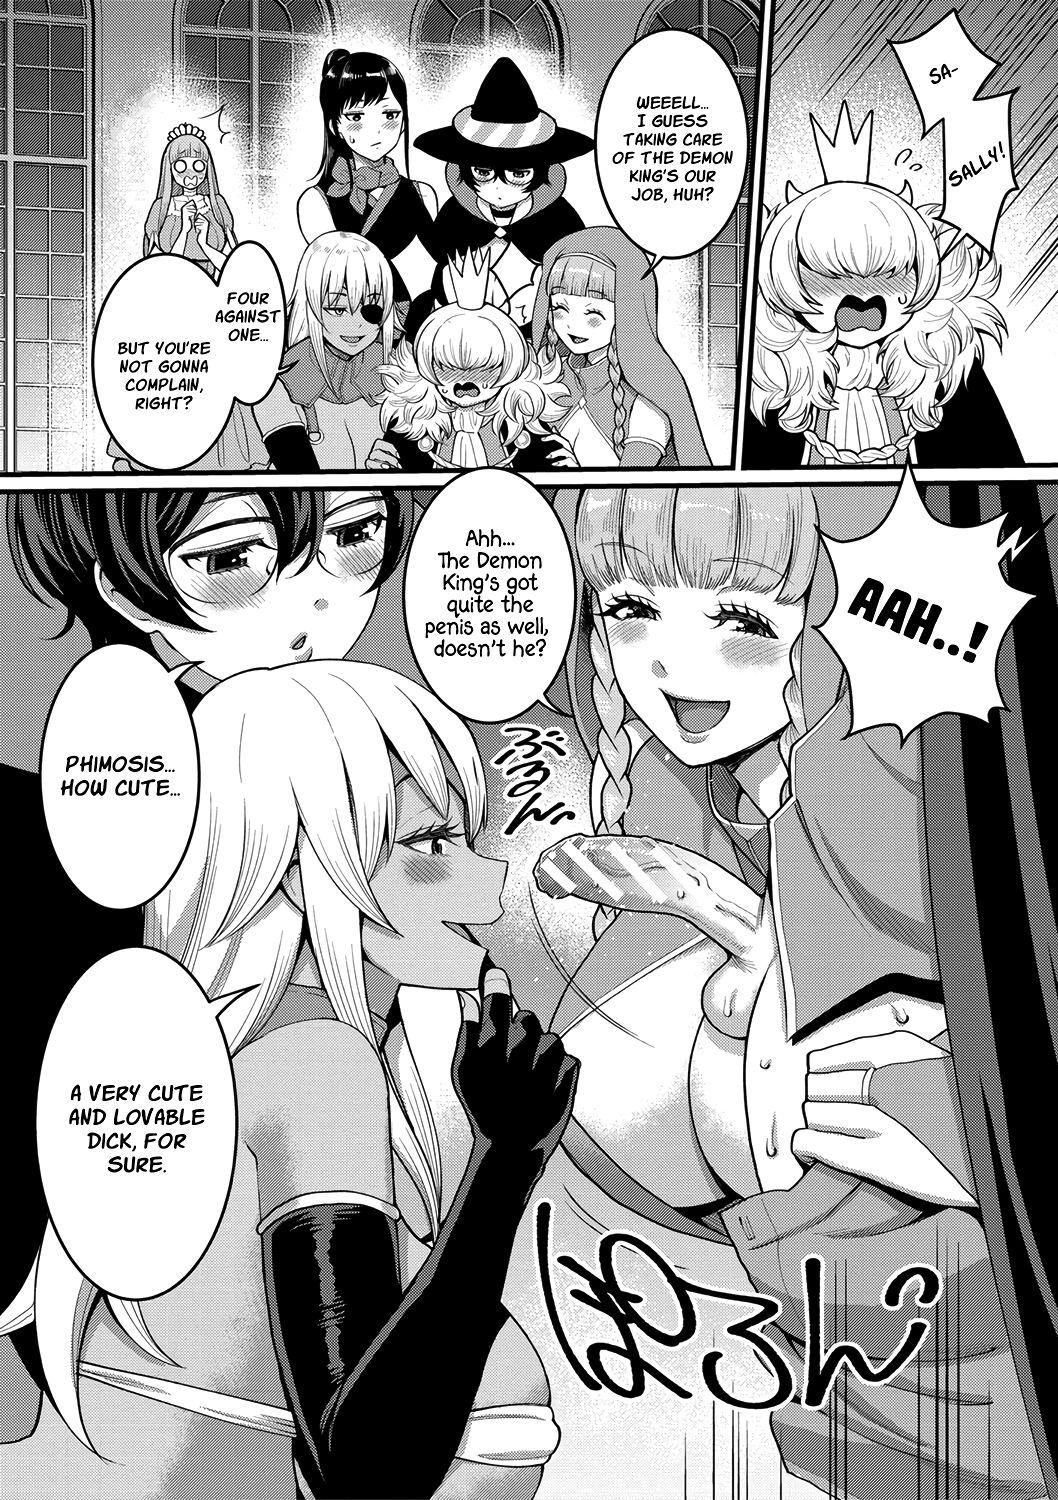 [Agata] ChinTrai Quest V ~Boku to Inma to Chijo-tachi to Orowareshi Himegimi~ | Dick Training Quest V ~Me, The Succubus, Some Perverted Women, and a Cursed Princess~ [English] [Digital] 3